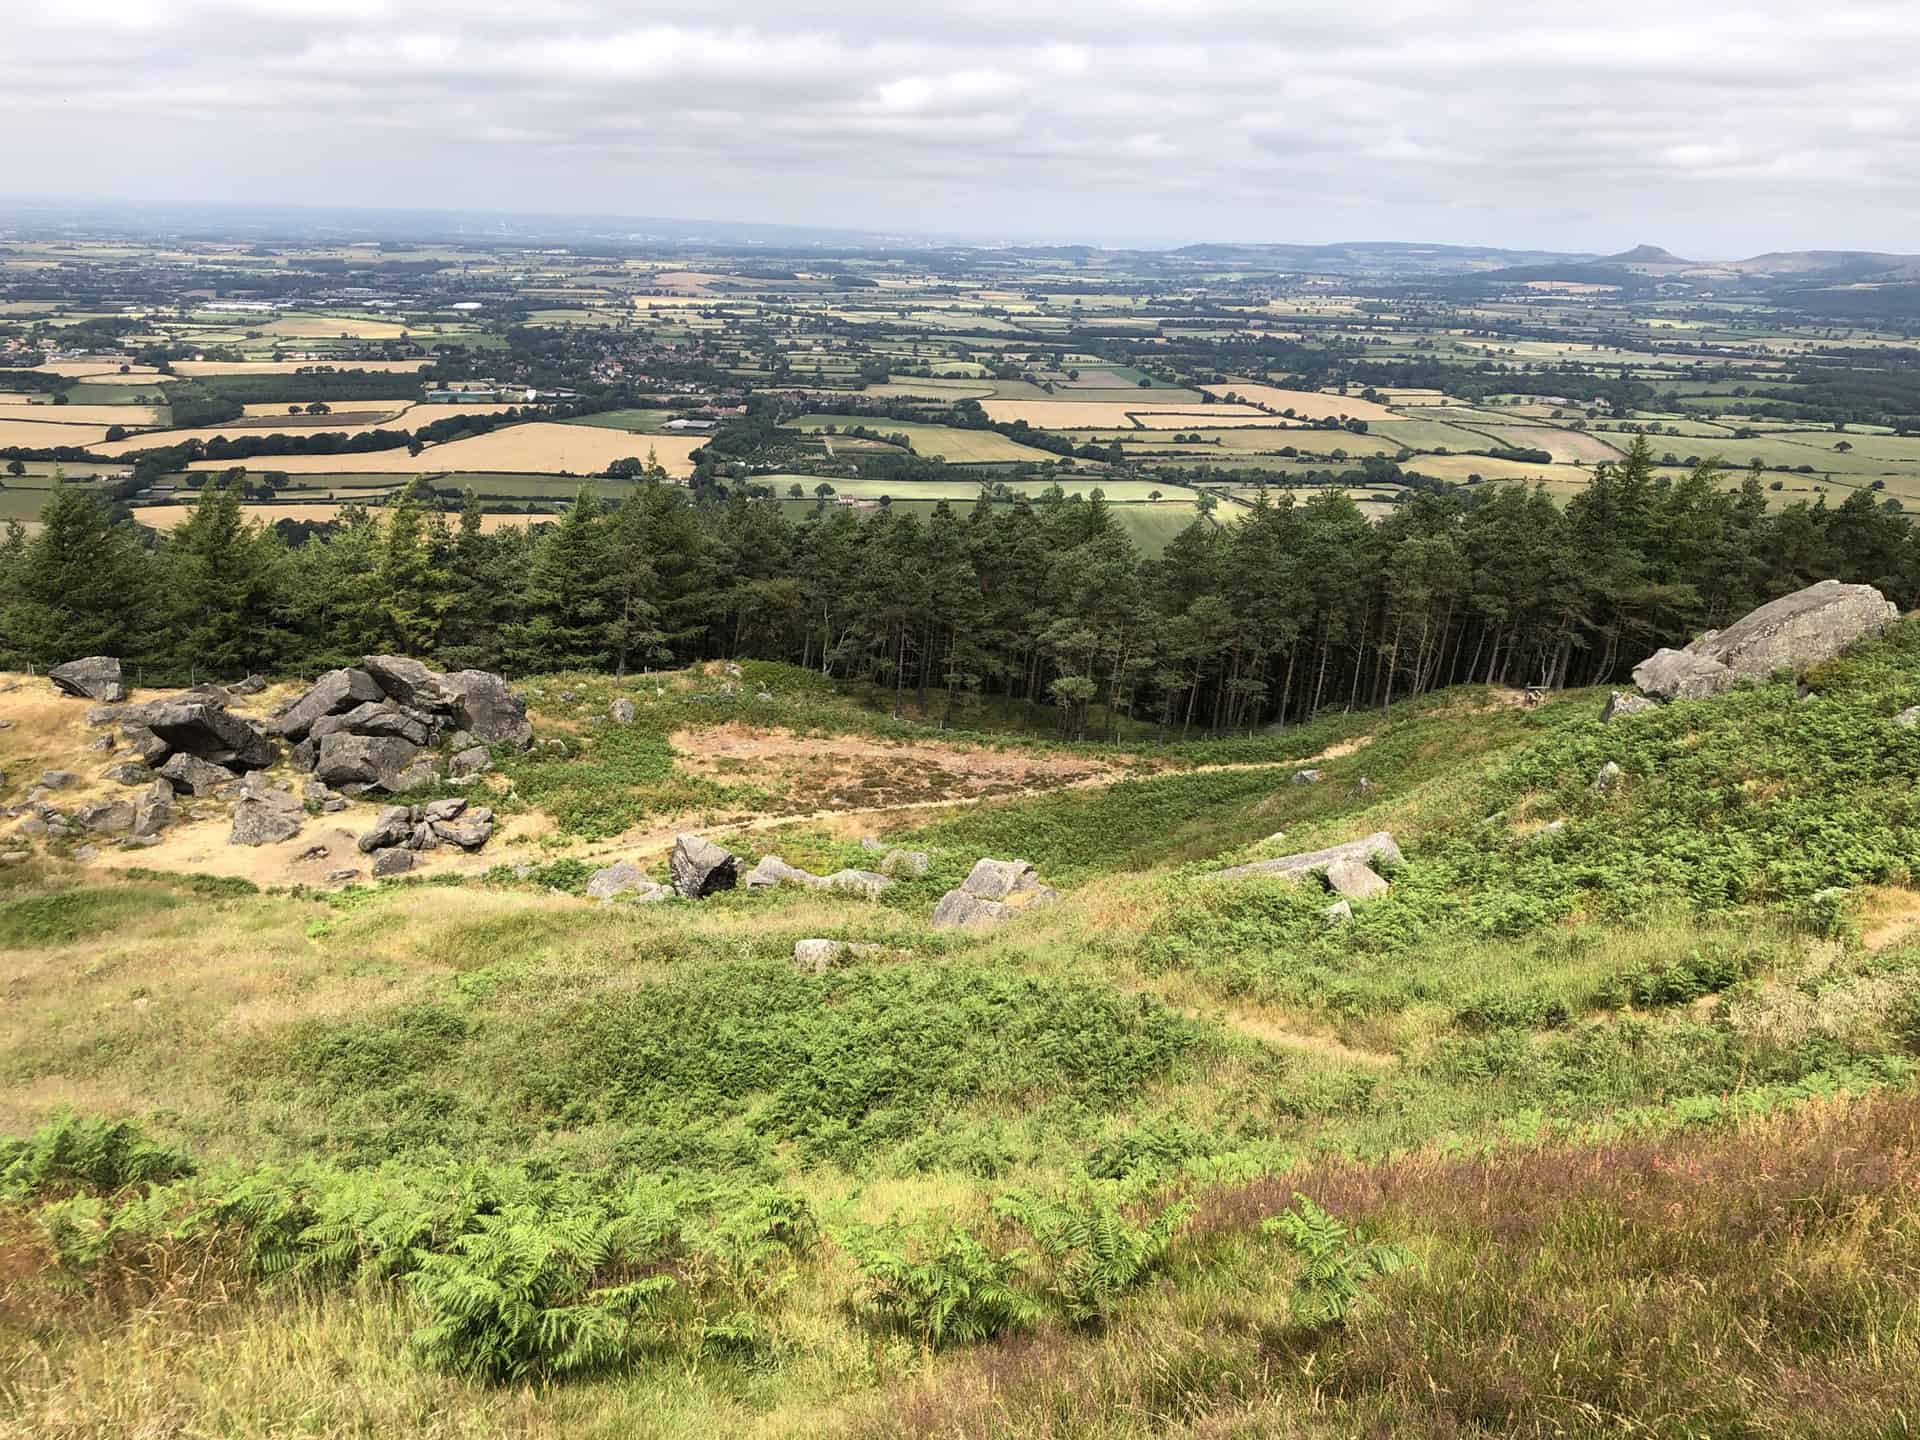 Breathtaking 360° views atop Wain Stones in the Cleveland Hills.